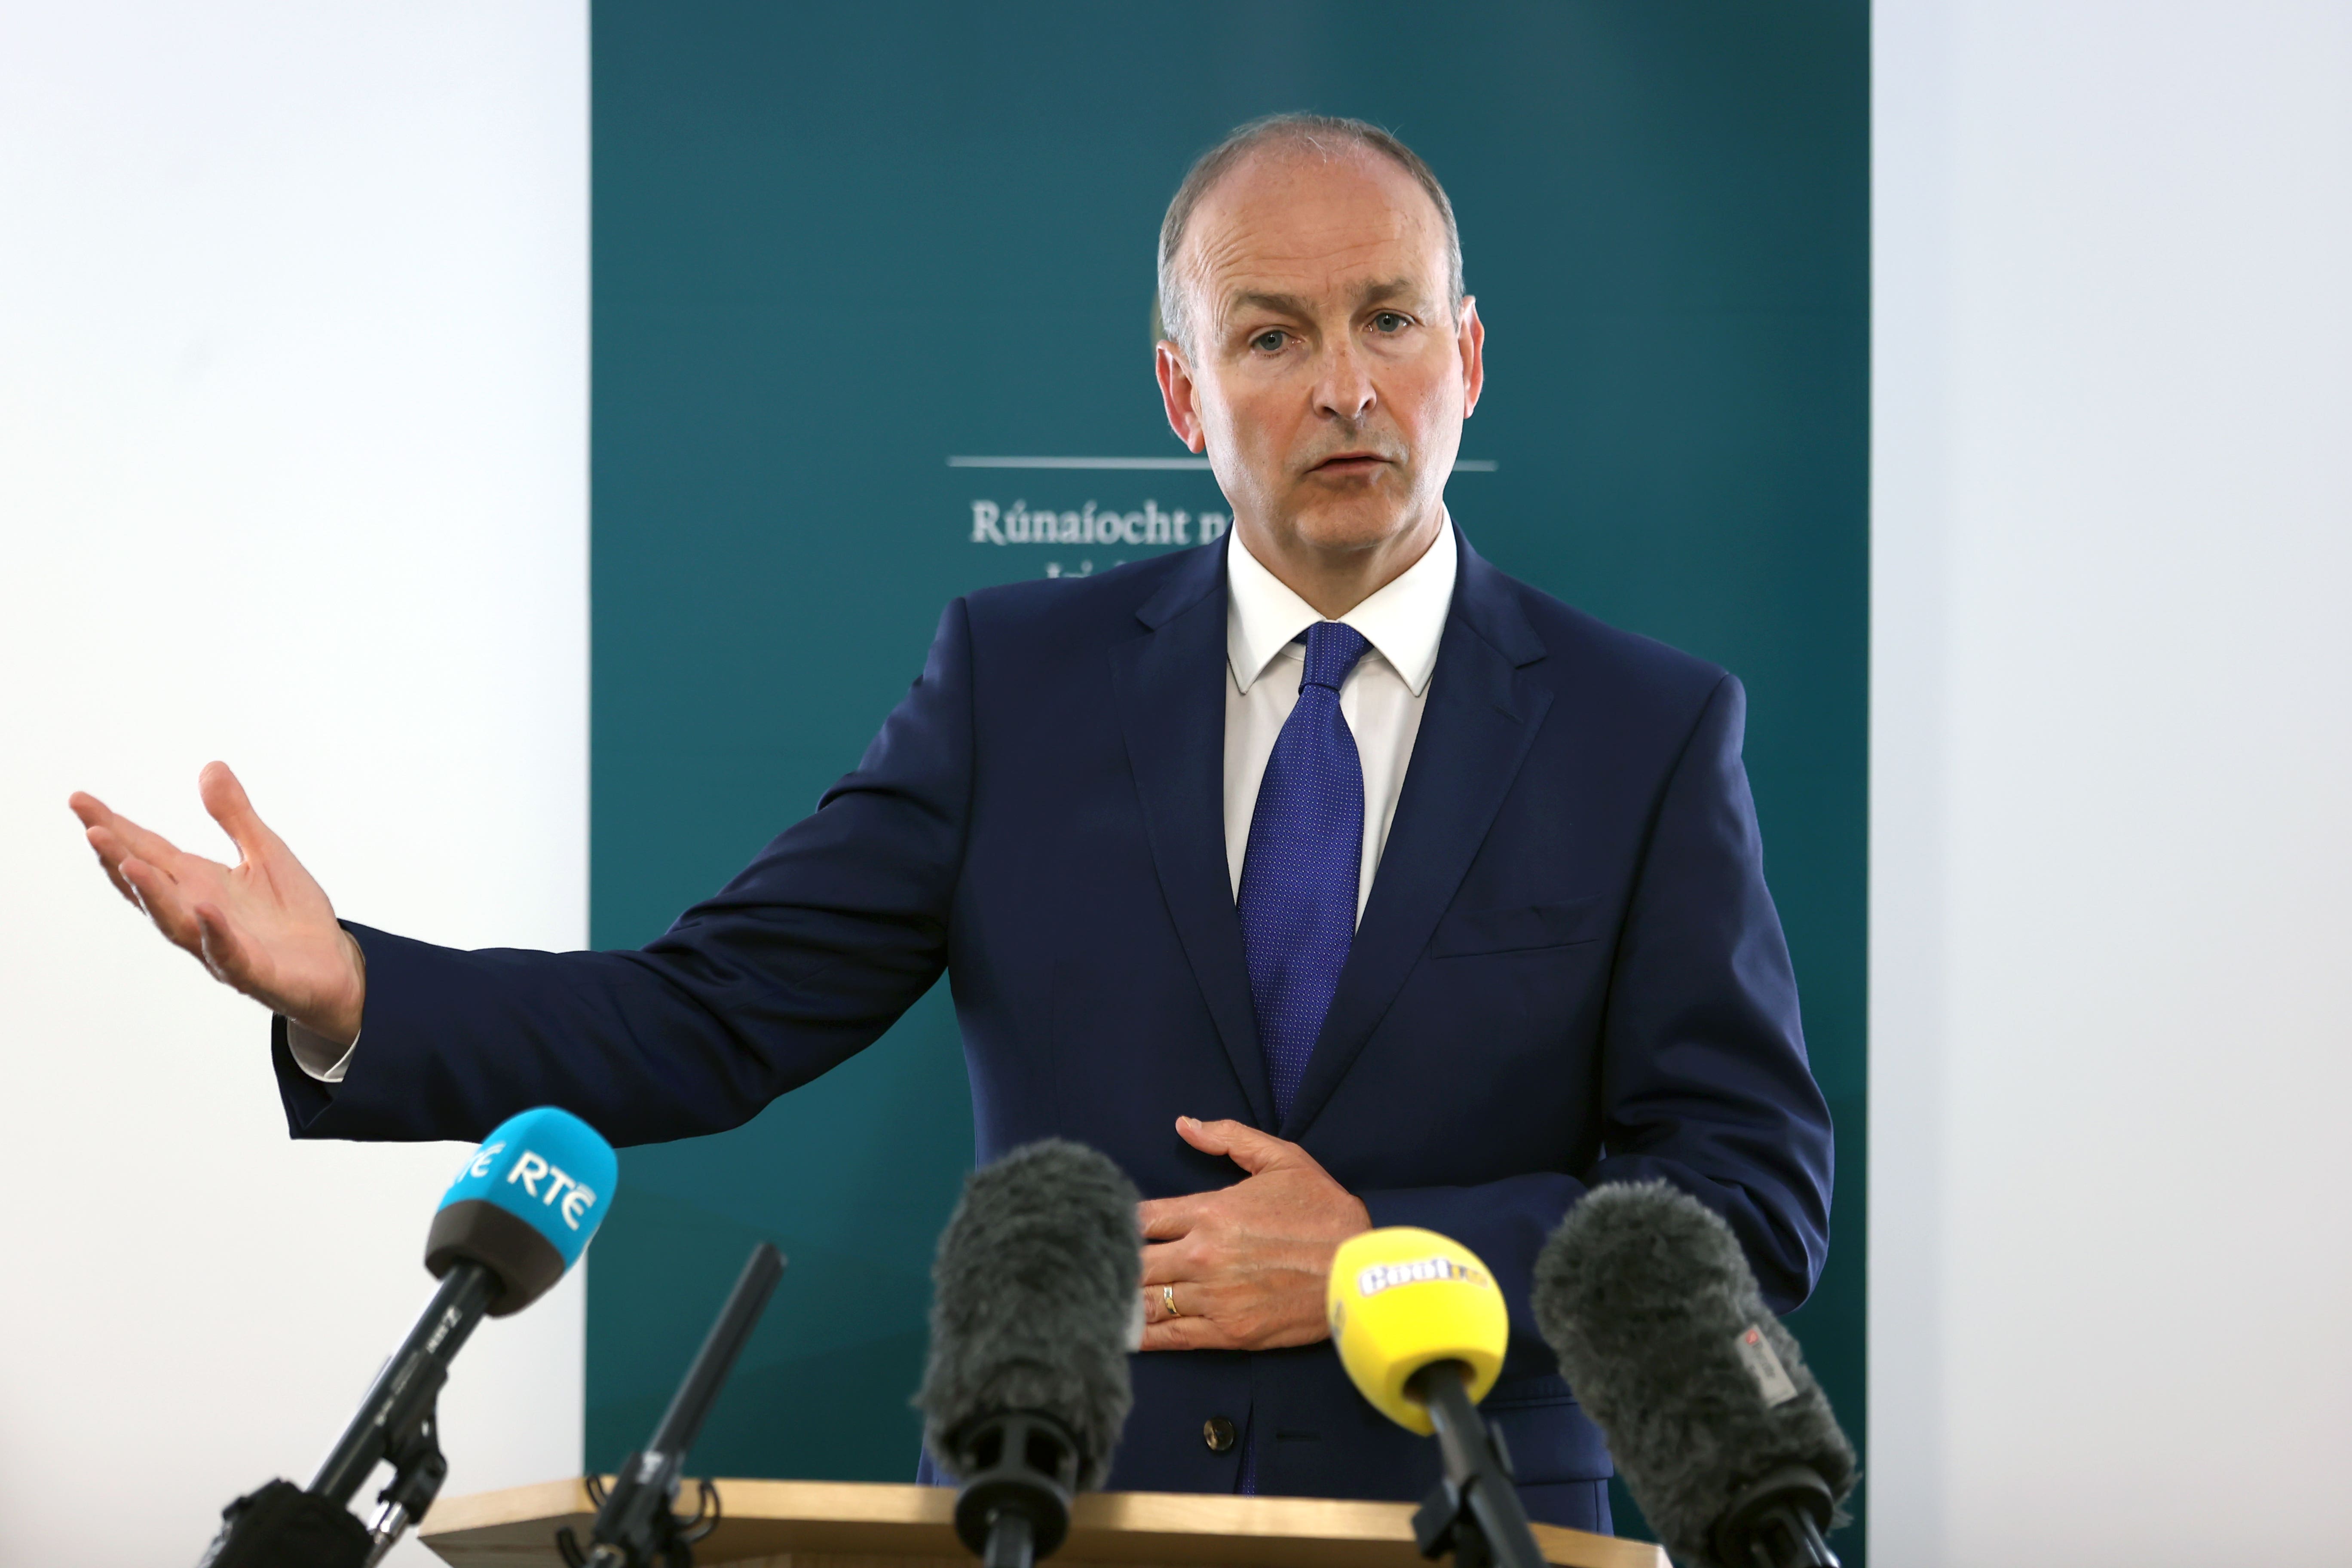 Tanaiste Micheal Martin during a press conference in the Irish Secretariat in Belfast, after meeting with some of Stormont’s main political parties (Liam McBurney/PA)